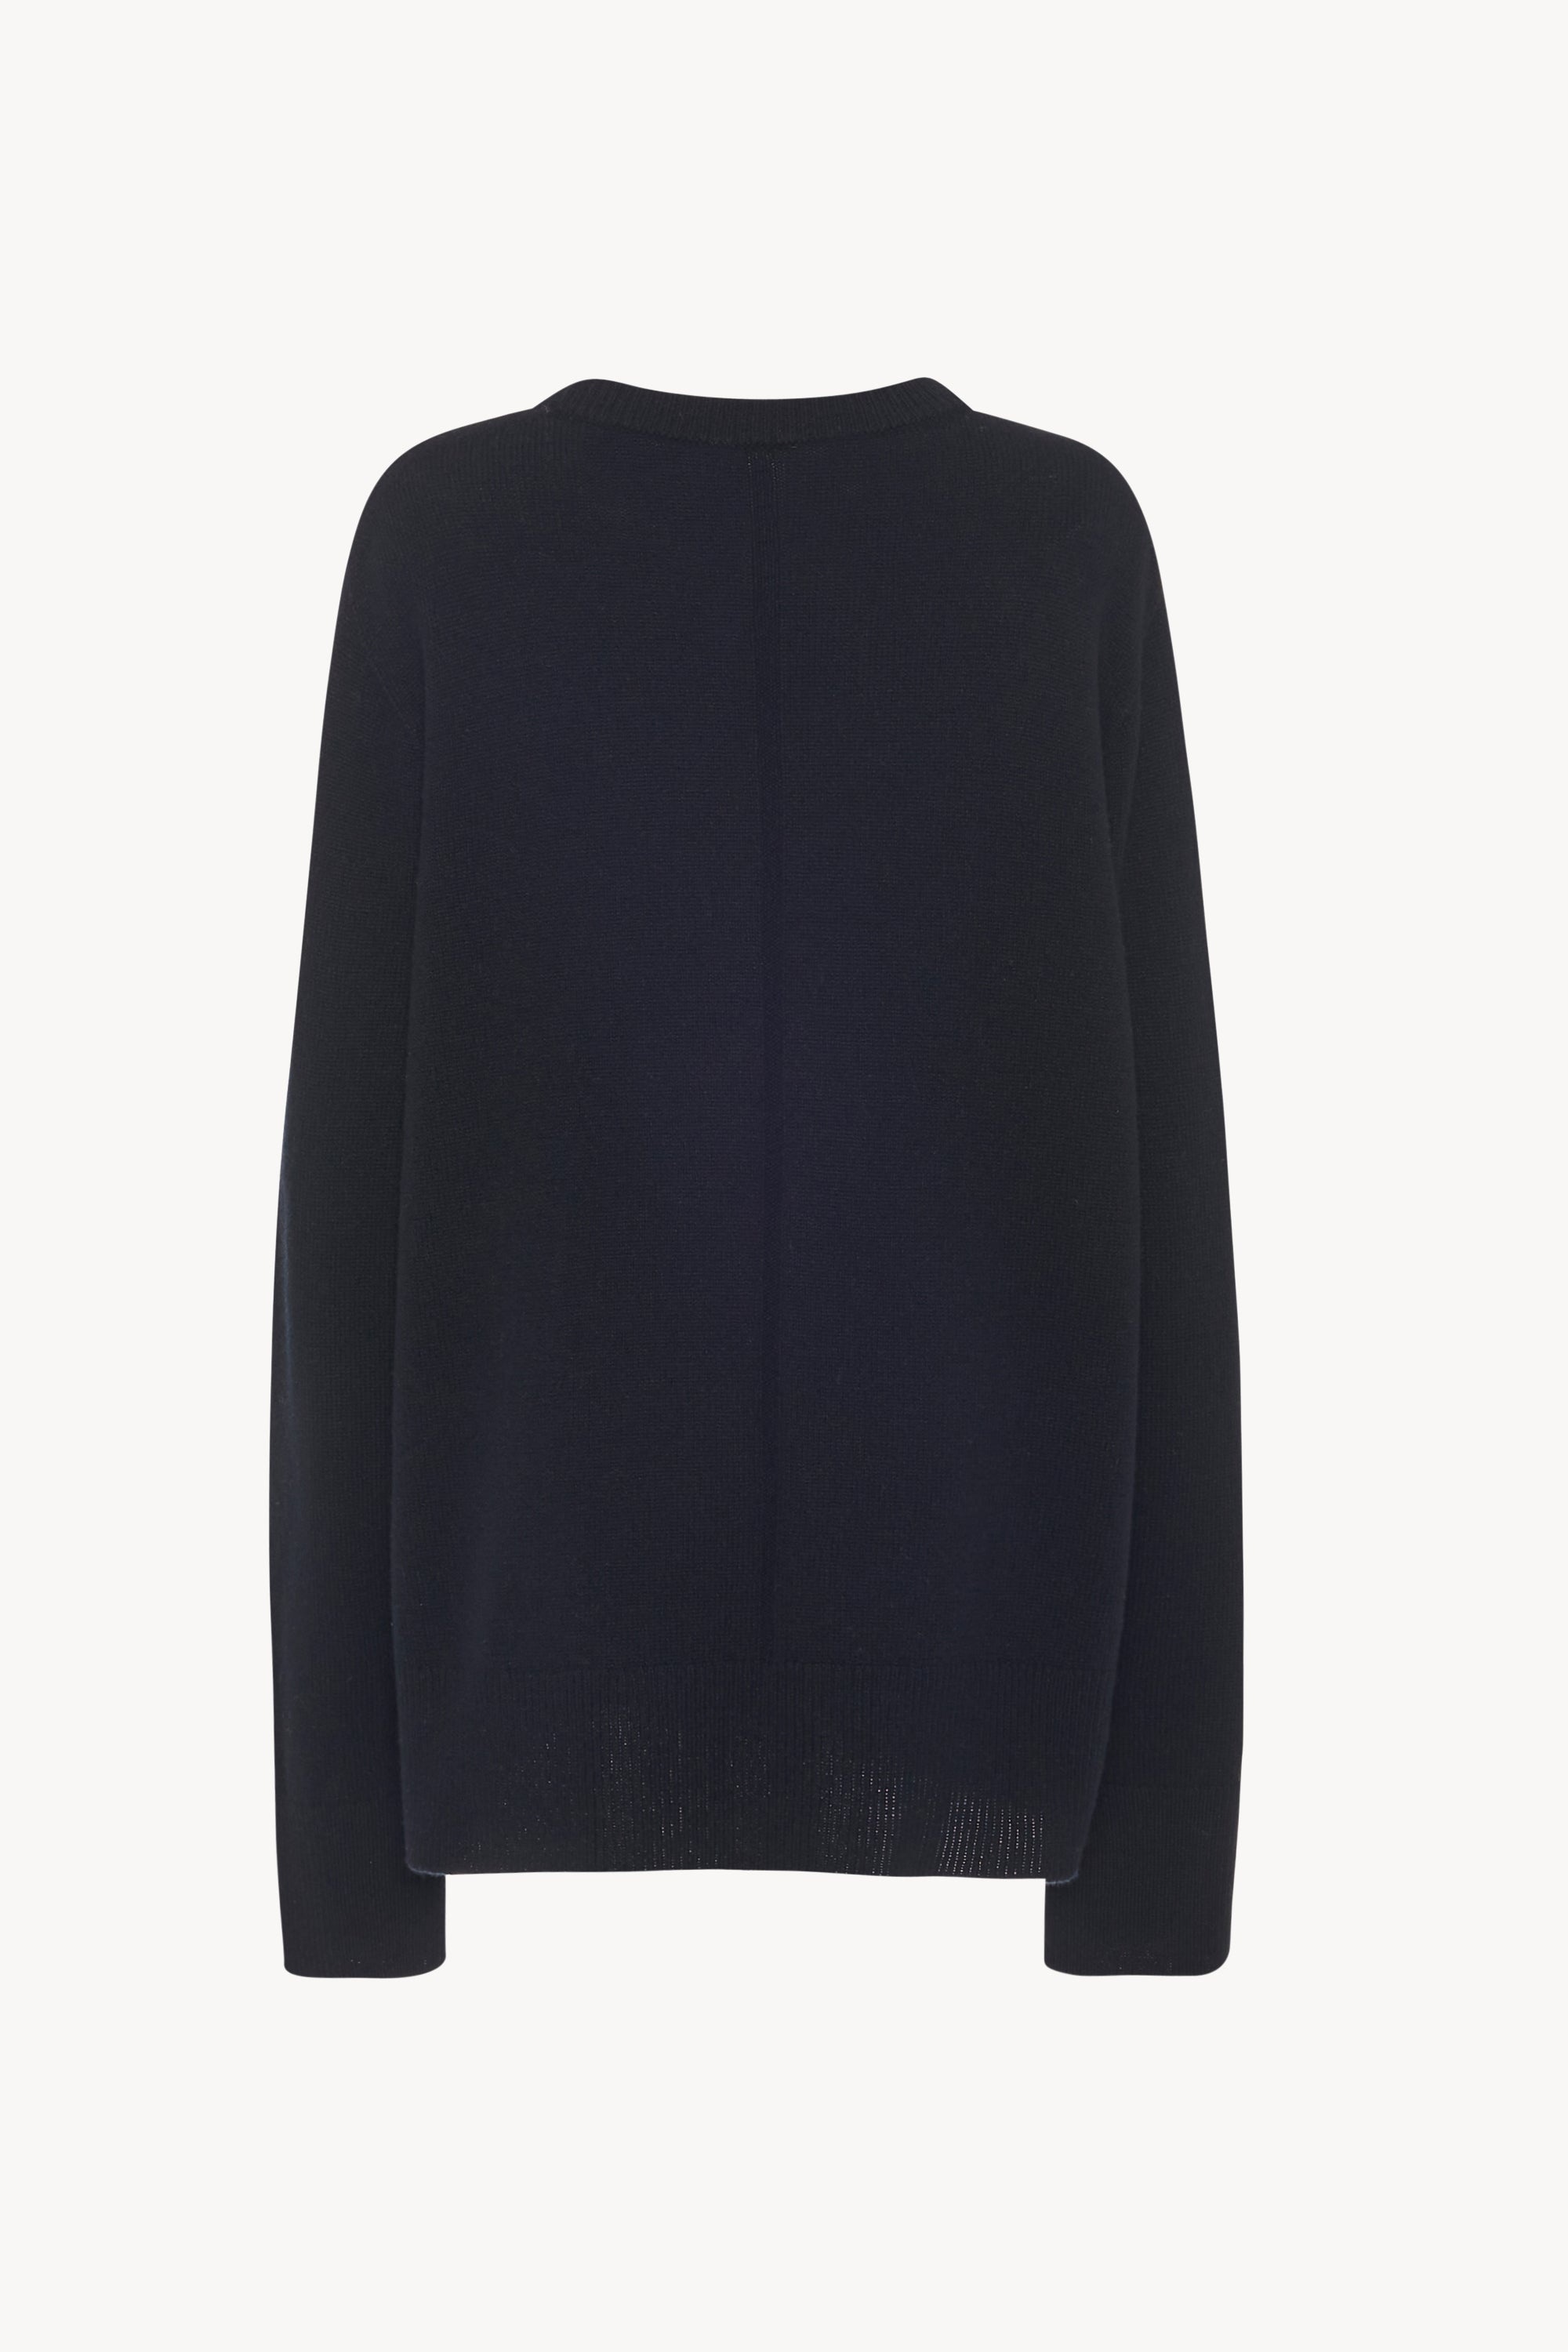 Sibem Top in Wool and Cashmere - 2